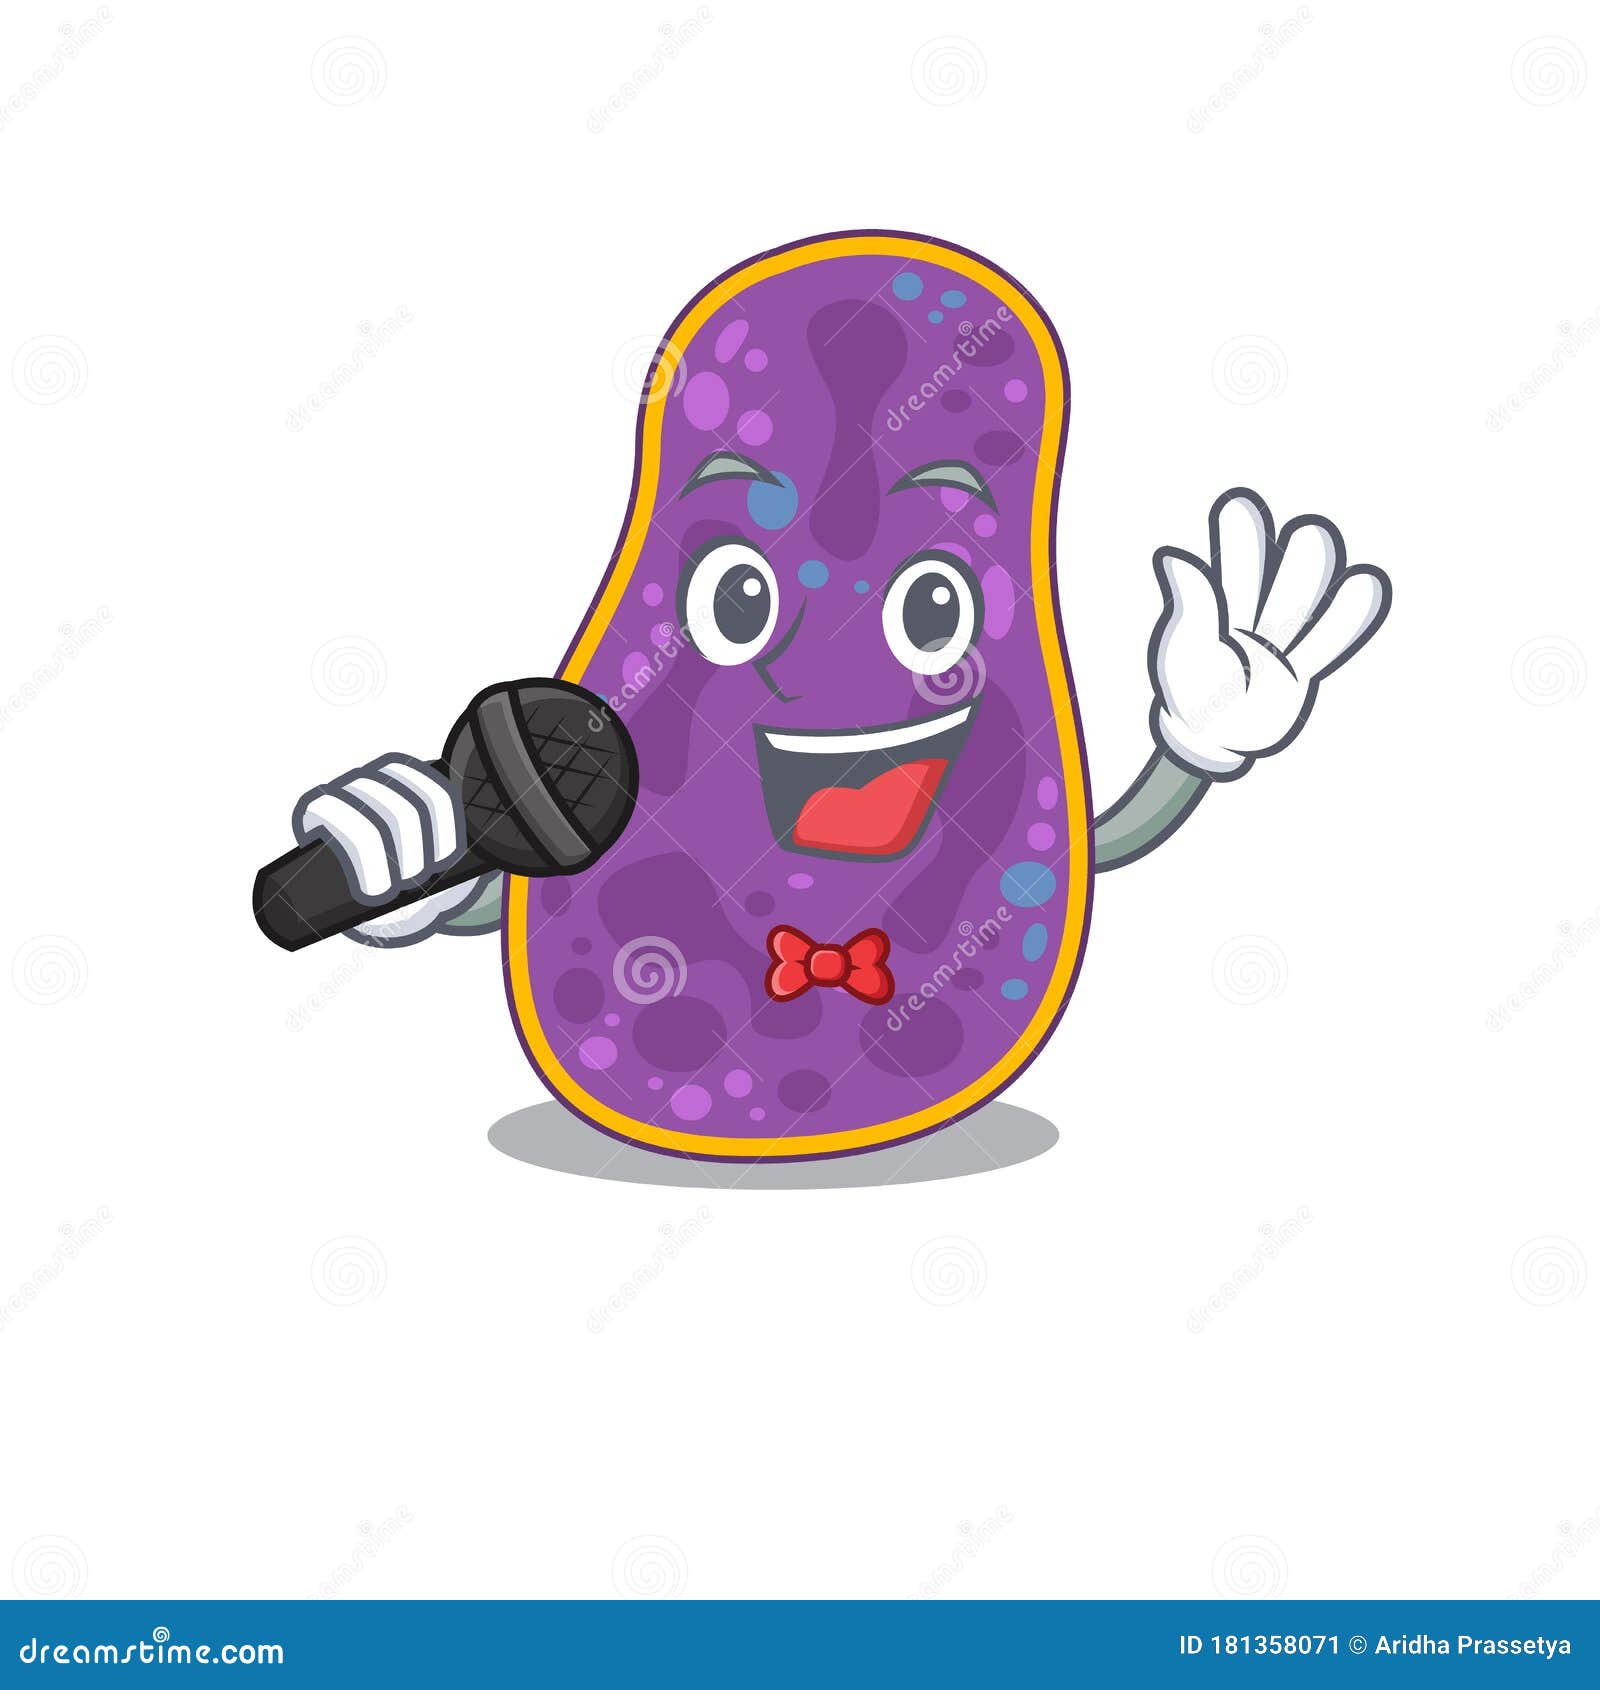 Talented Singer of Shigella Sp. Bacteria Cartoon Character Holding a  Microphone Stock Vector - Illustration of emoticon, epidemy: 181358071